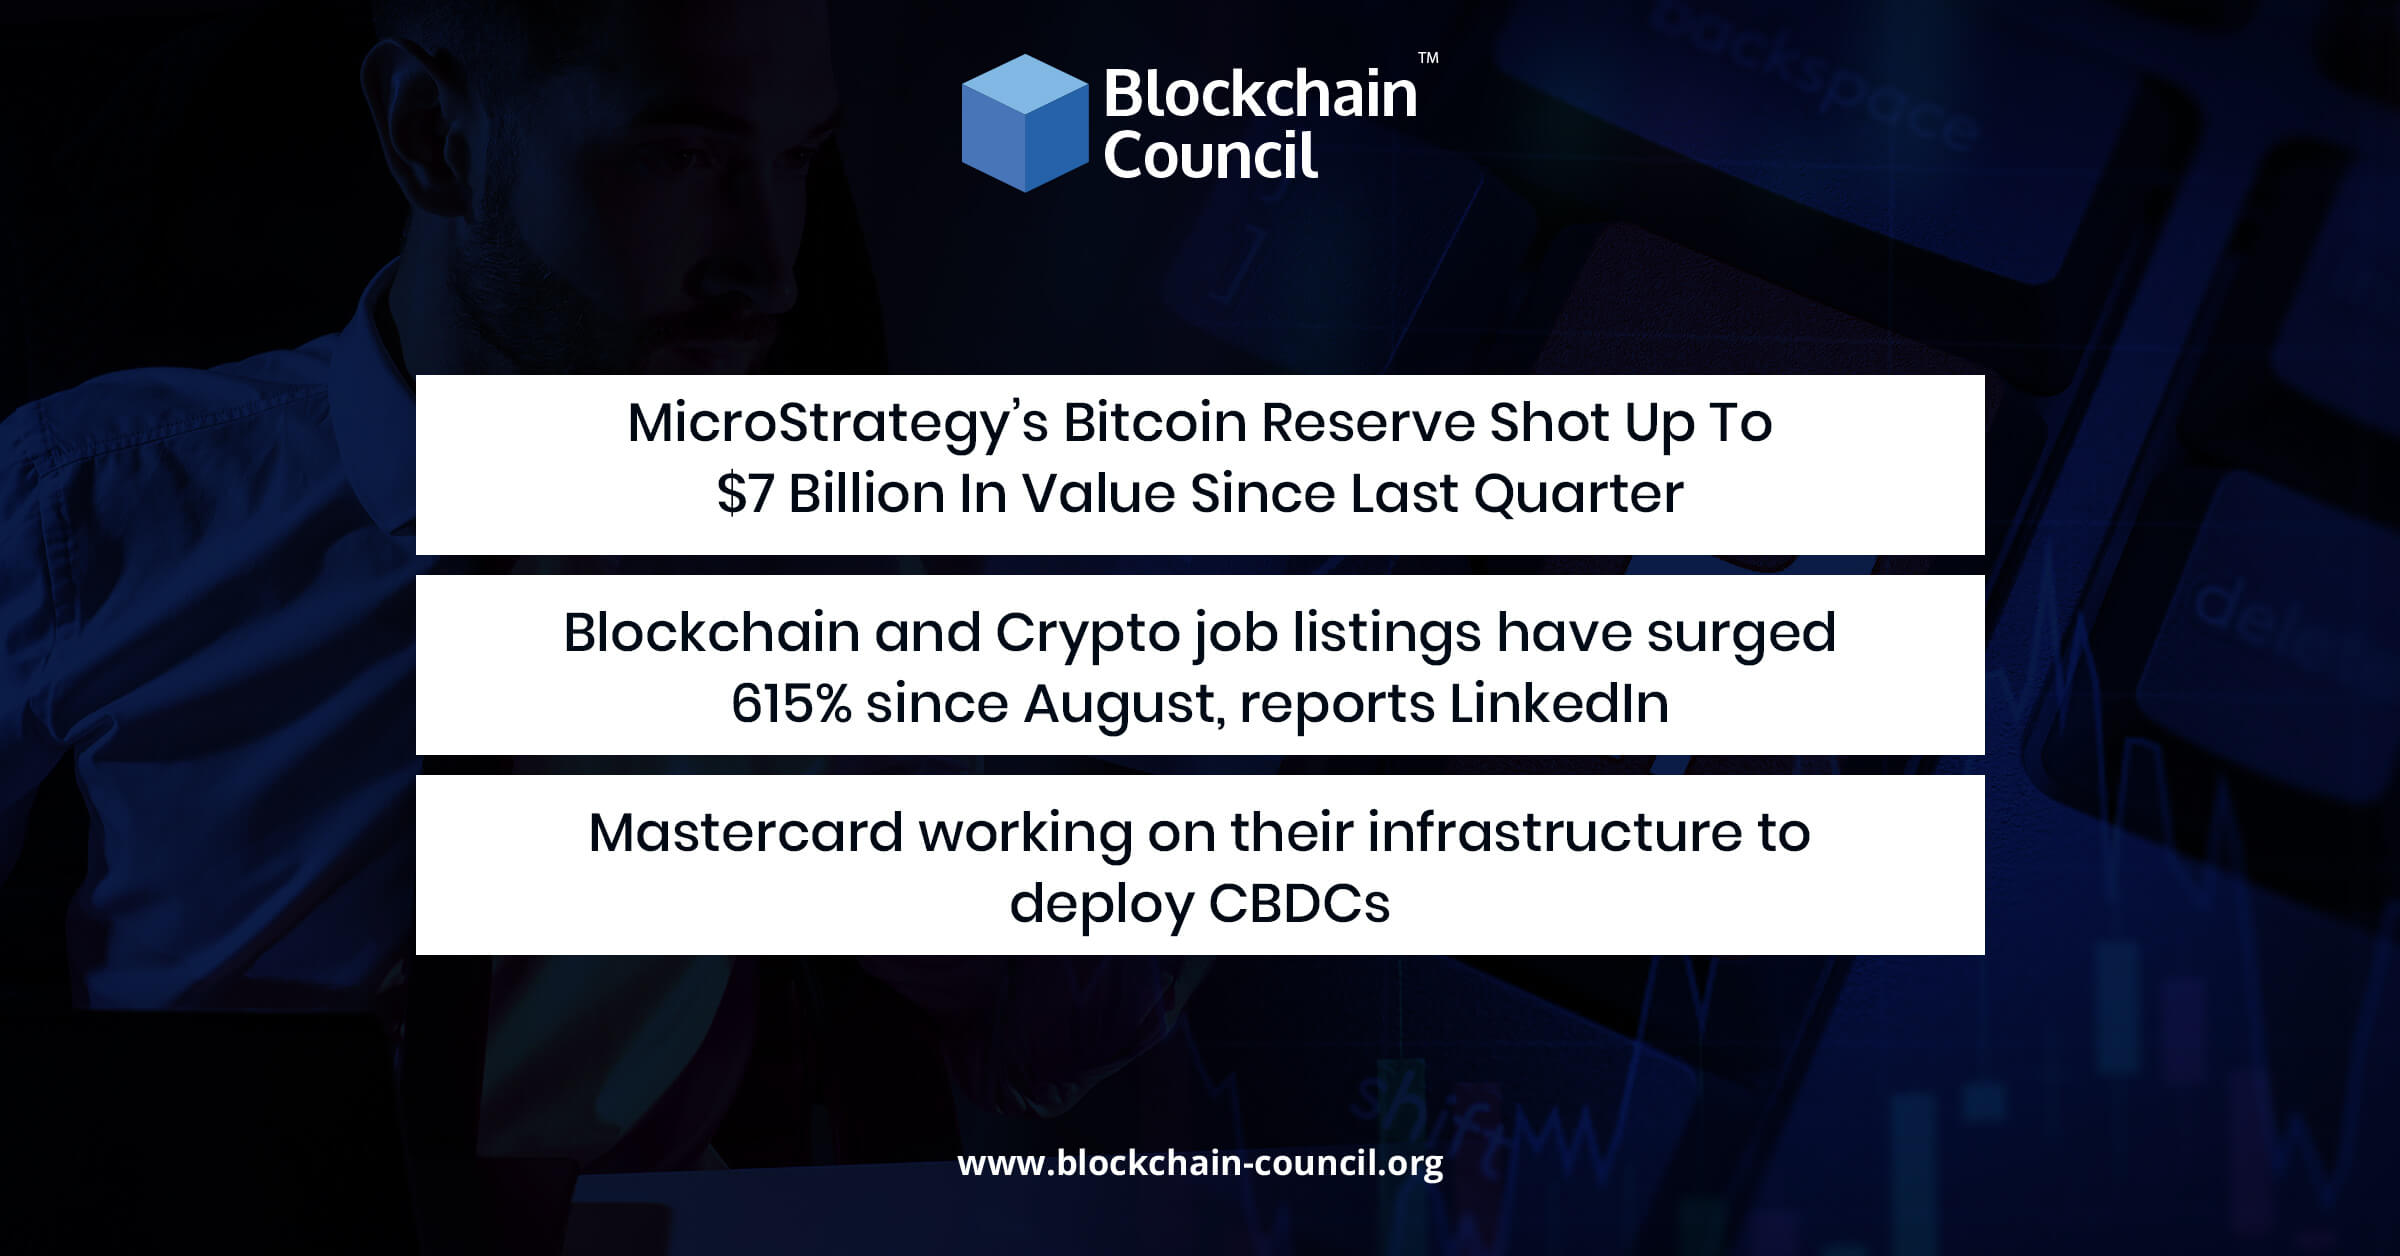 MicroStrategy’s Bitcoin Reserve Shot Up To $7 Billion In Value Since Last Quarter (1)